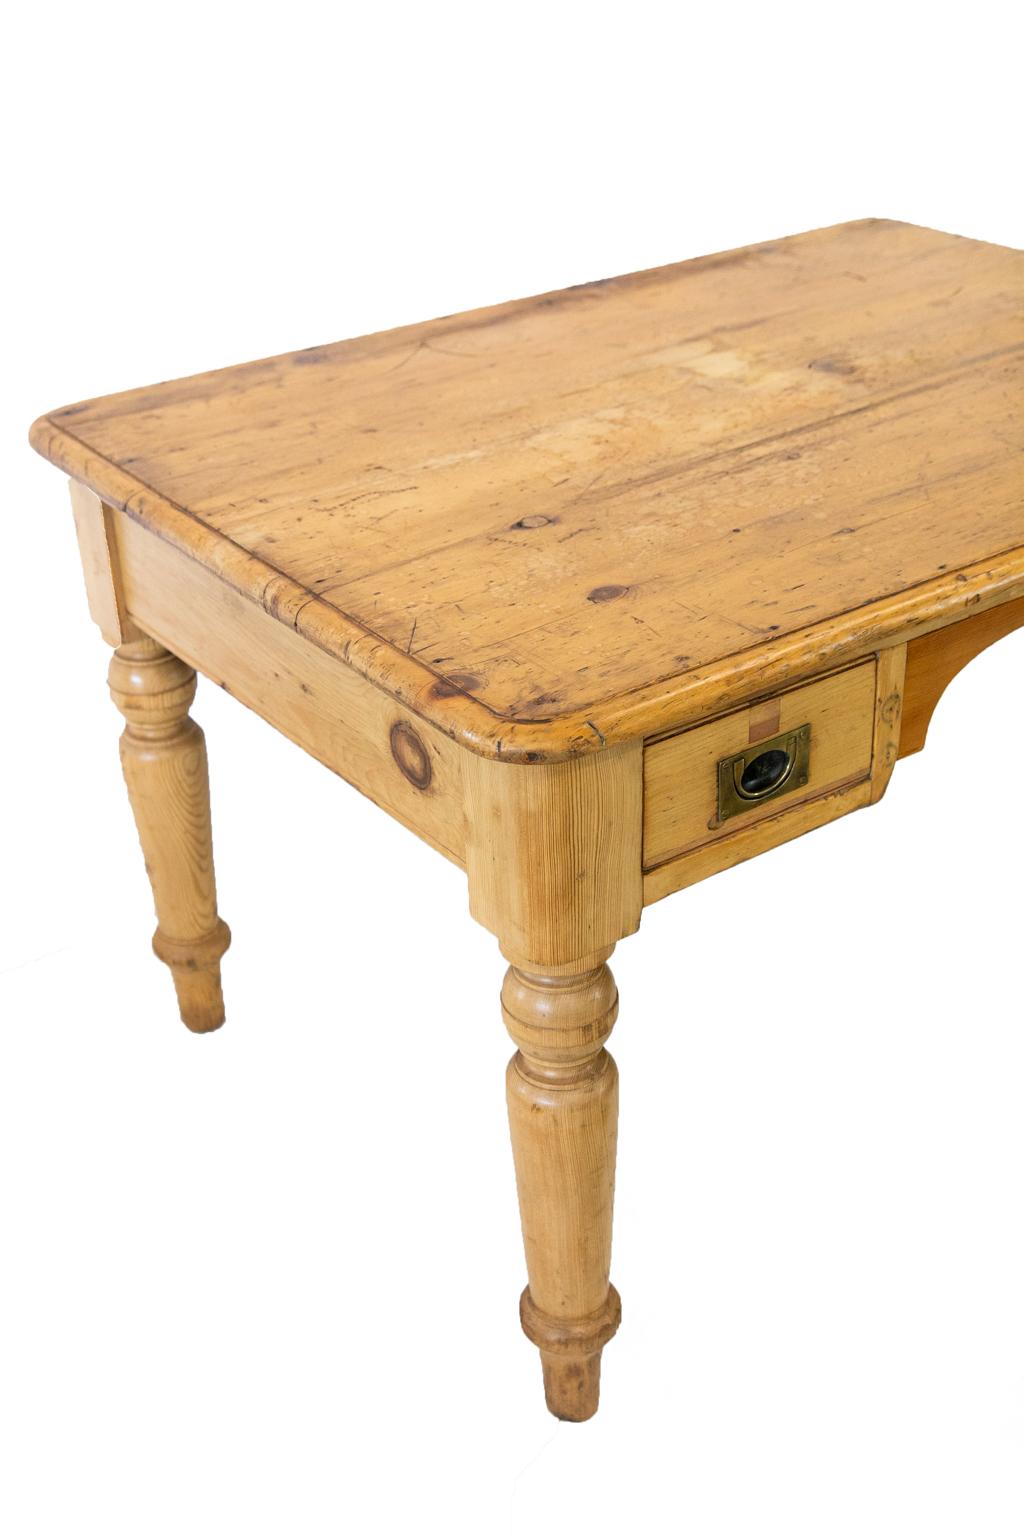 English pine writing table, the drawers having flush Campaign handles. The right hand drawer has the original lock, but the left hand drawer lock is missing. A hole has been professionally filled with pine to match. The top has some spotting and